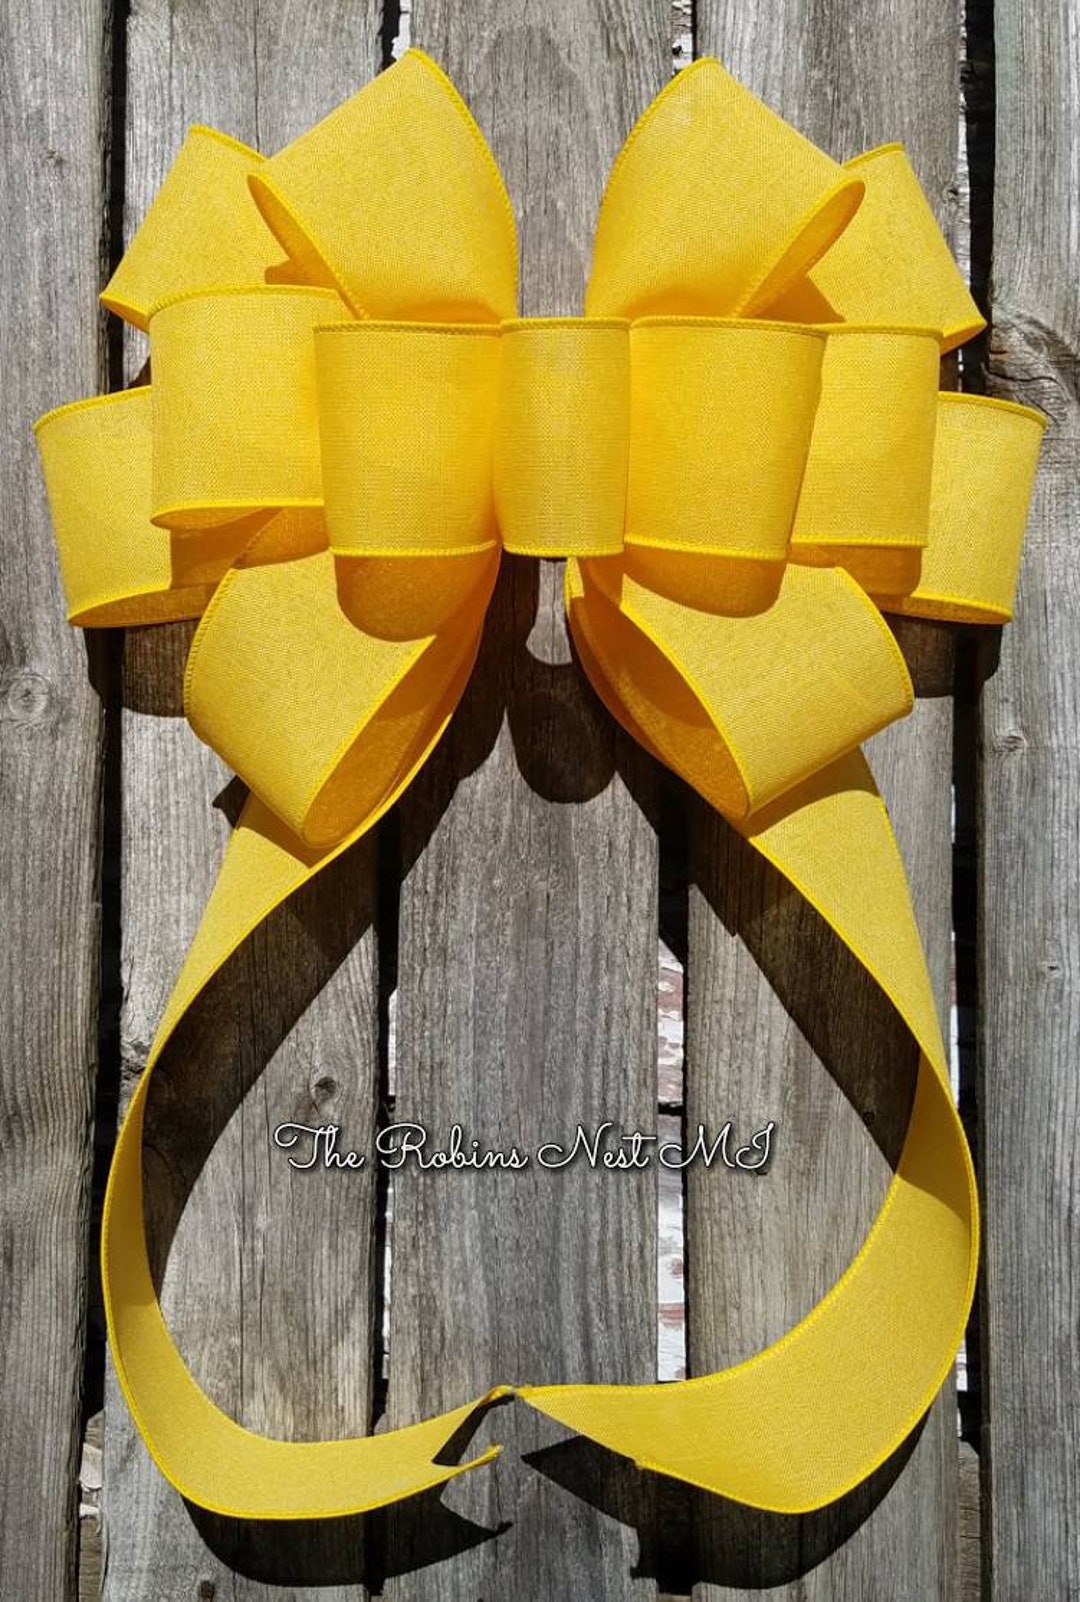 Large Yellow Ribbon Pull Bows - 9 Wide, Set of 6, Fall, Christmas, Gift  Bows, Easter, Support Our Troops Ribbons 